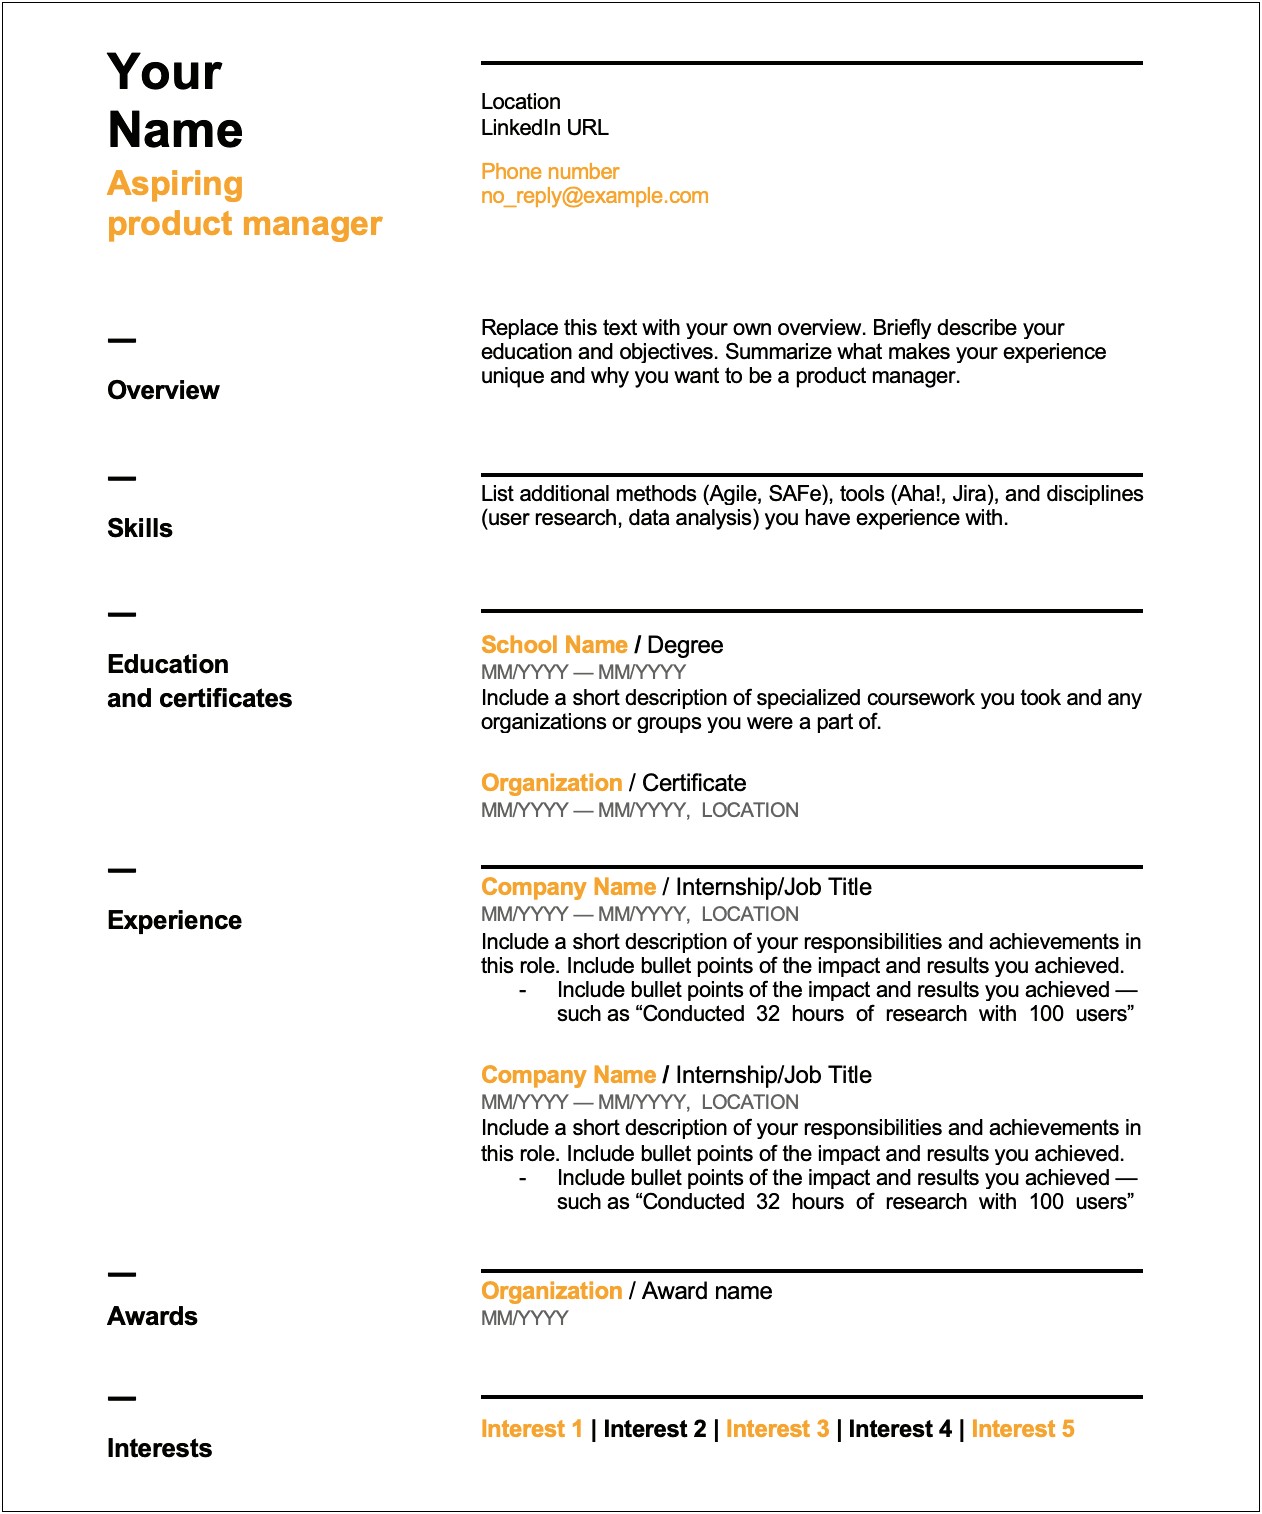 Experience Bullet Points Or Not On Resume